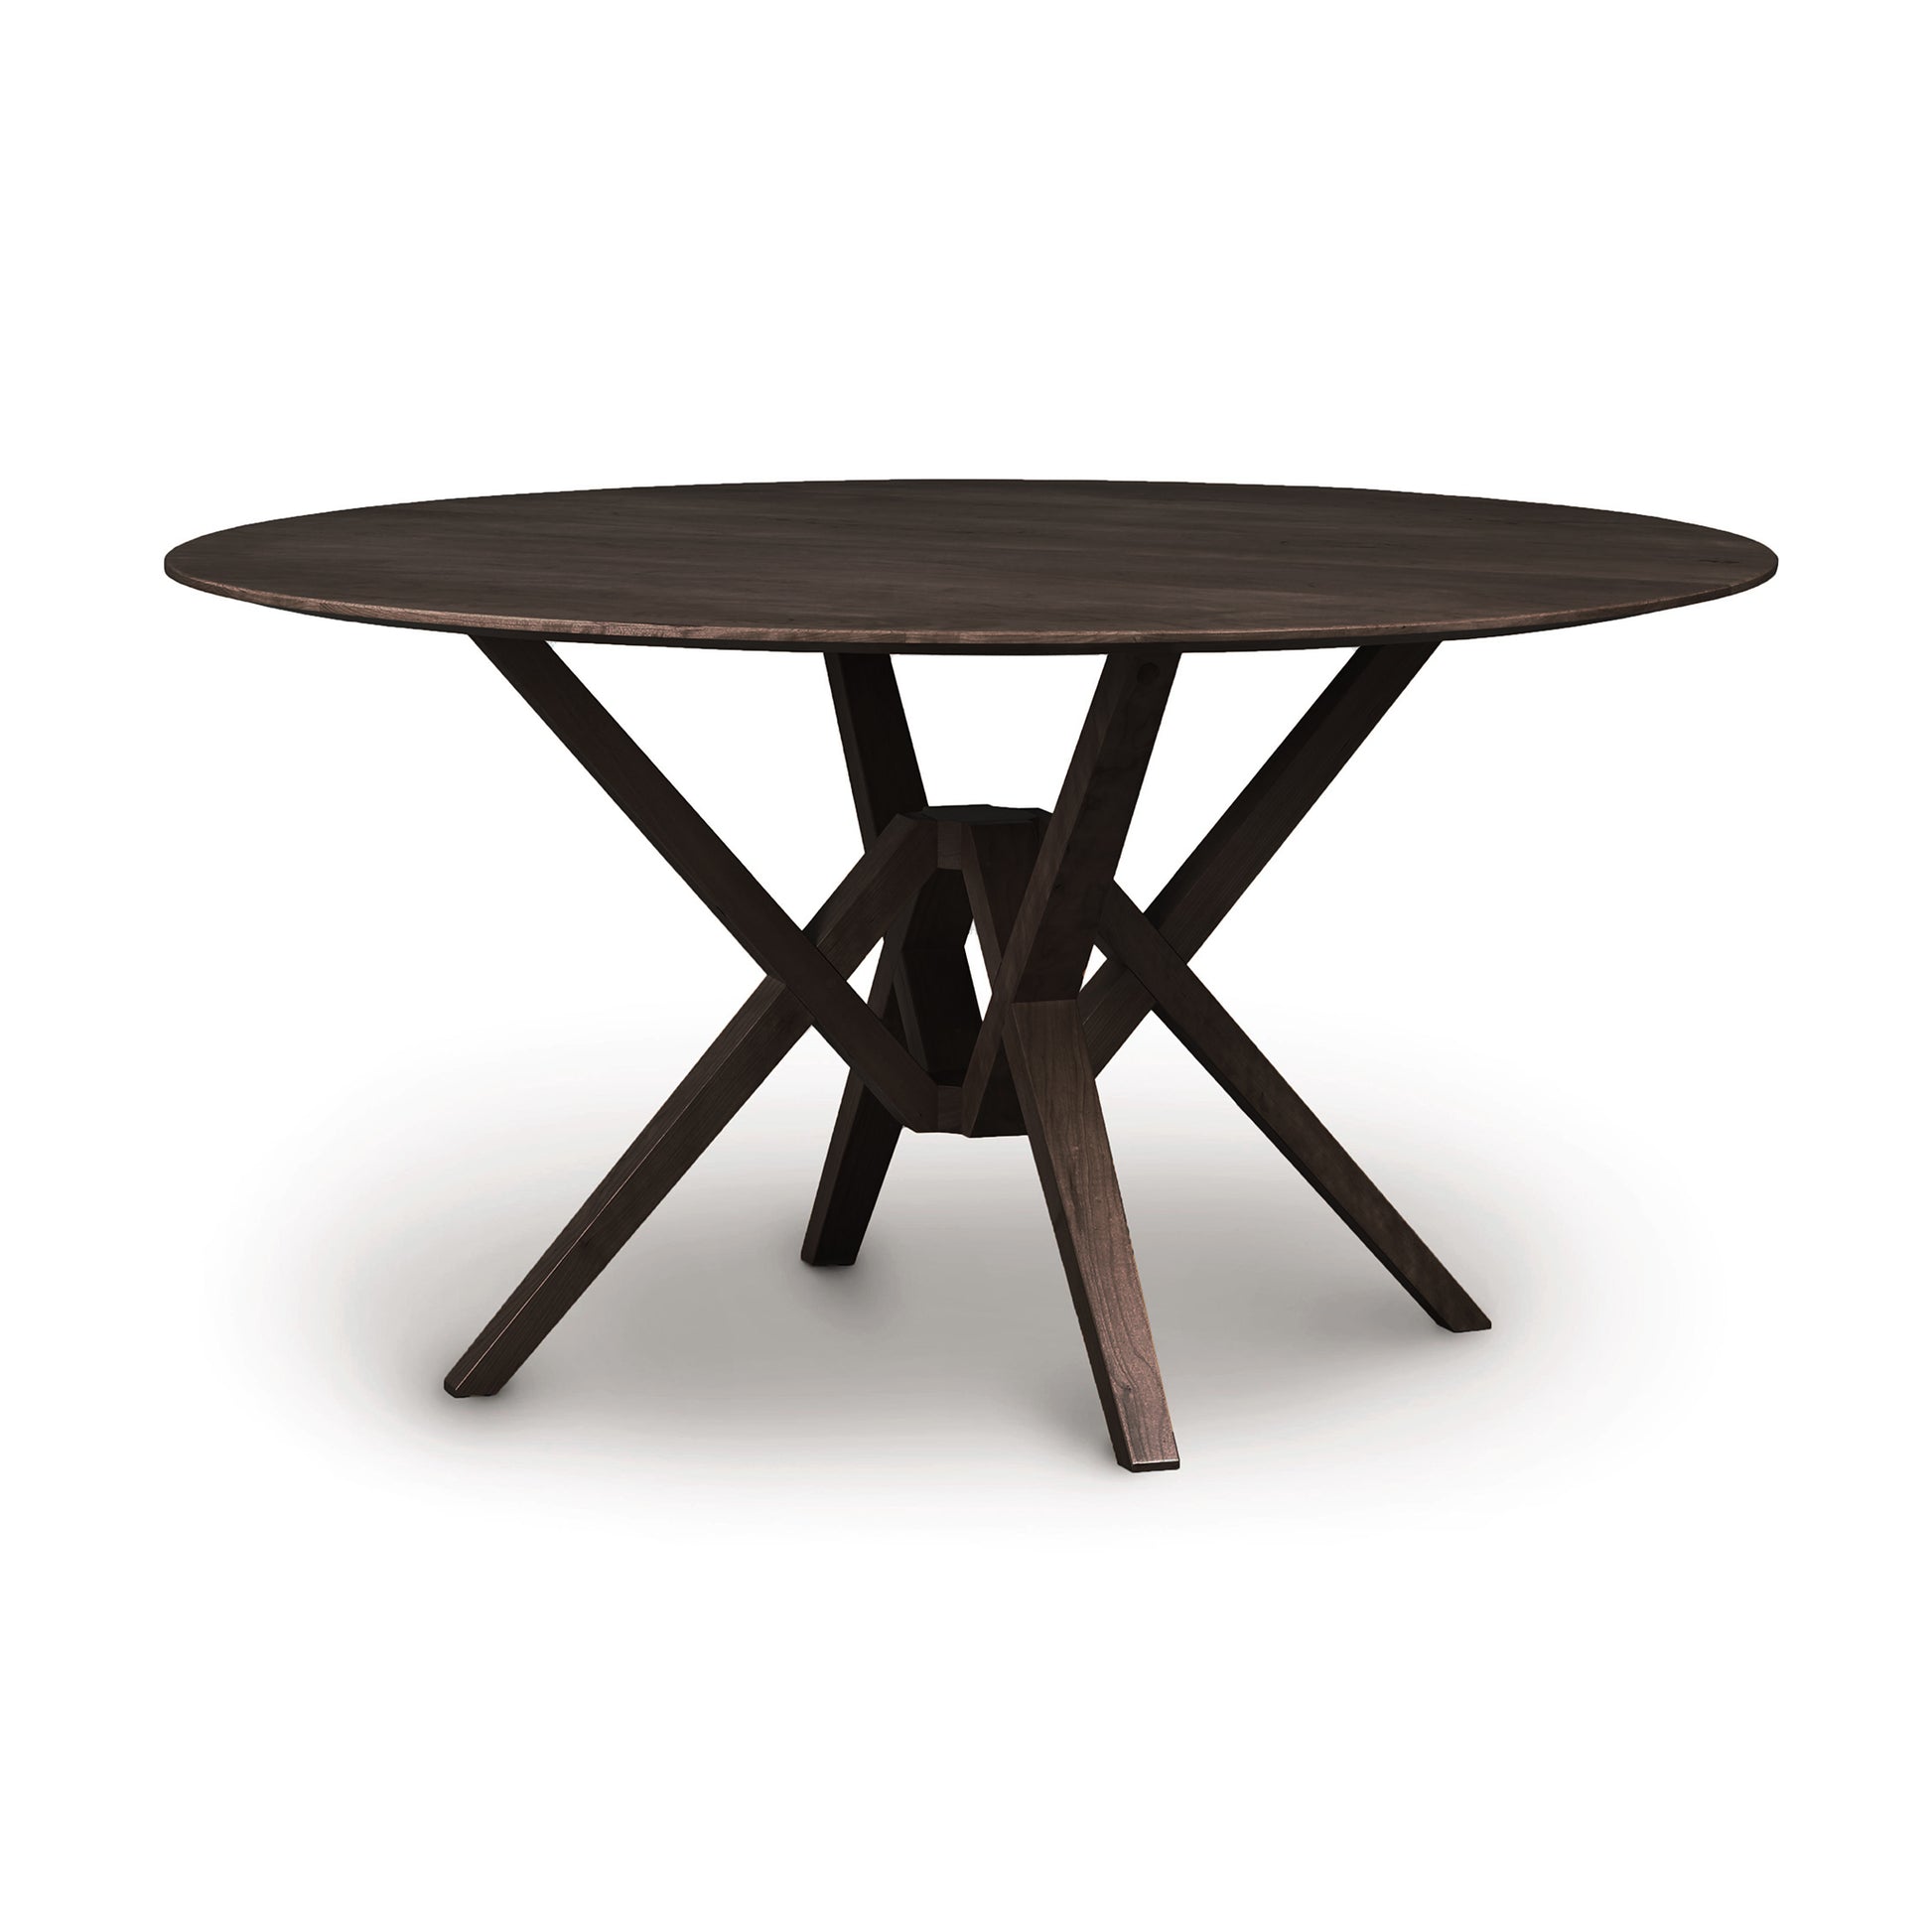 Round wooden Exeter Round Solid Top Dining Table with a cross-shaped base, isolated on a white background. Crafted from sustainably harvested hardwoods by Copeland Furniture.